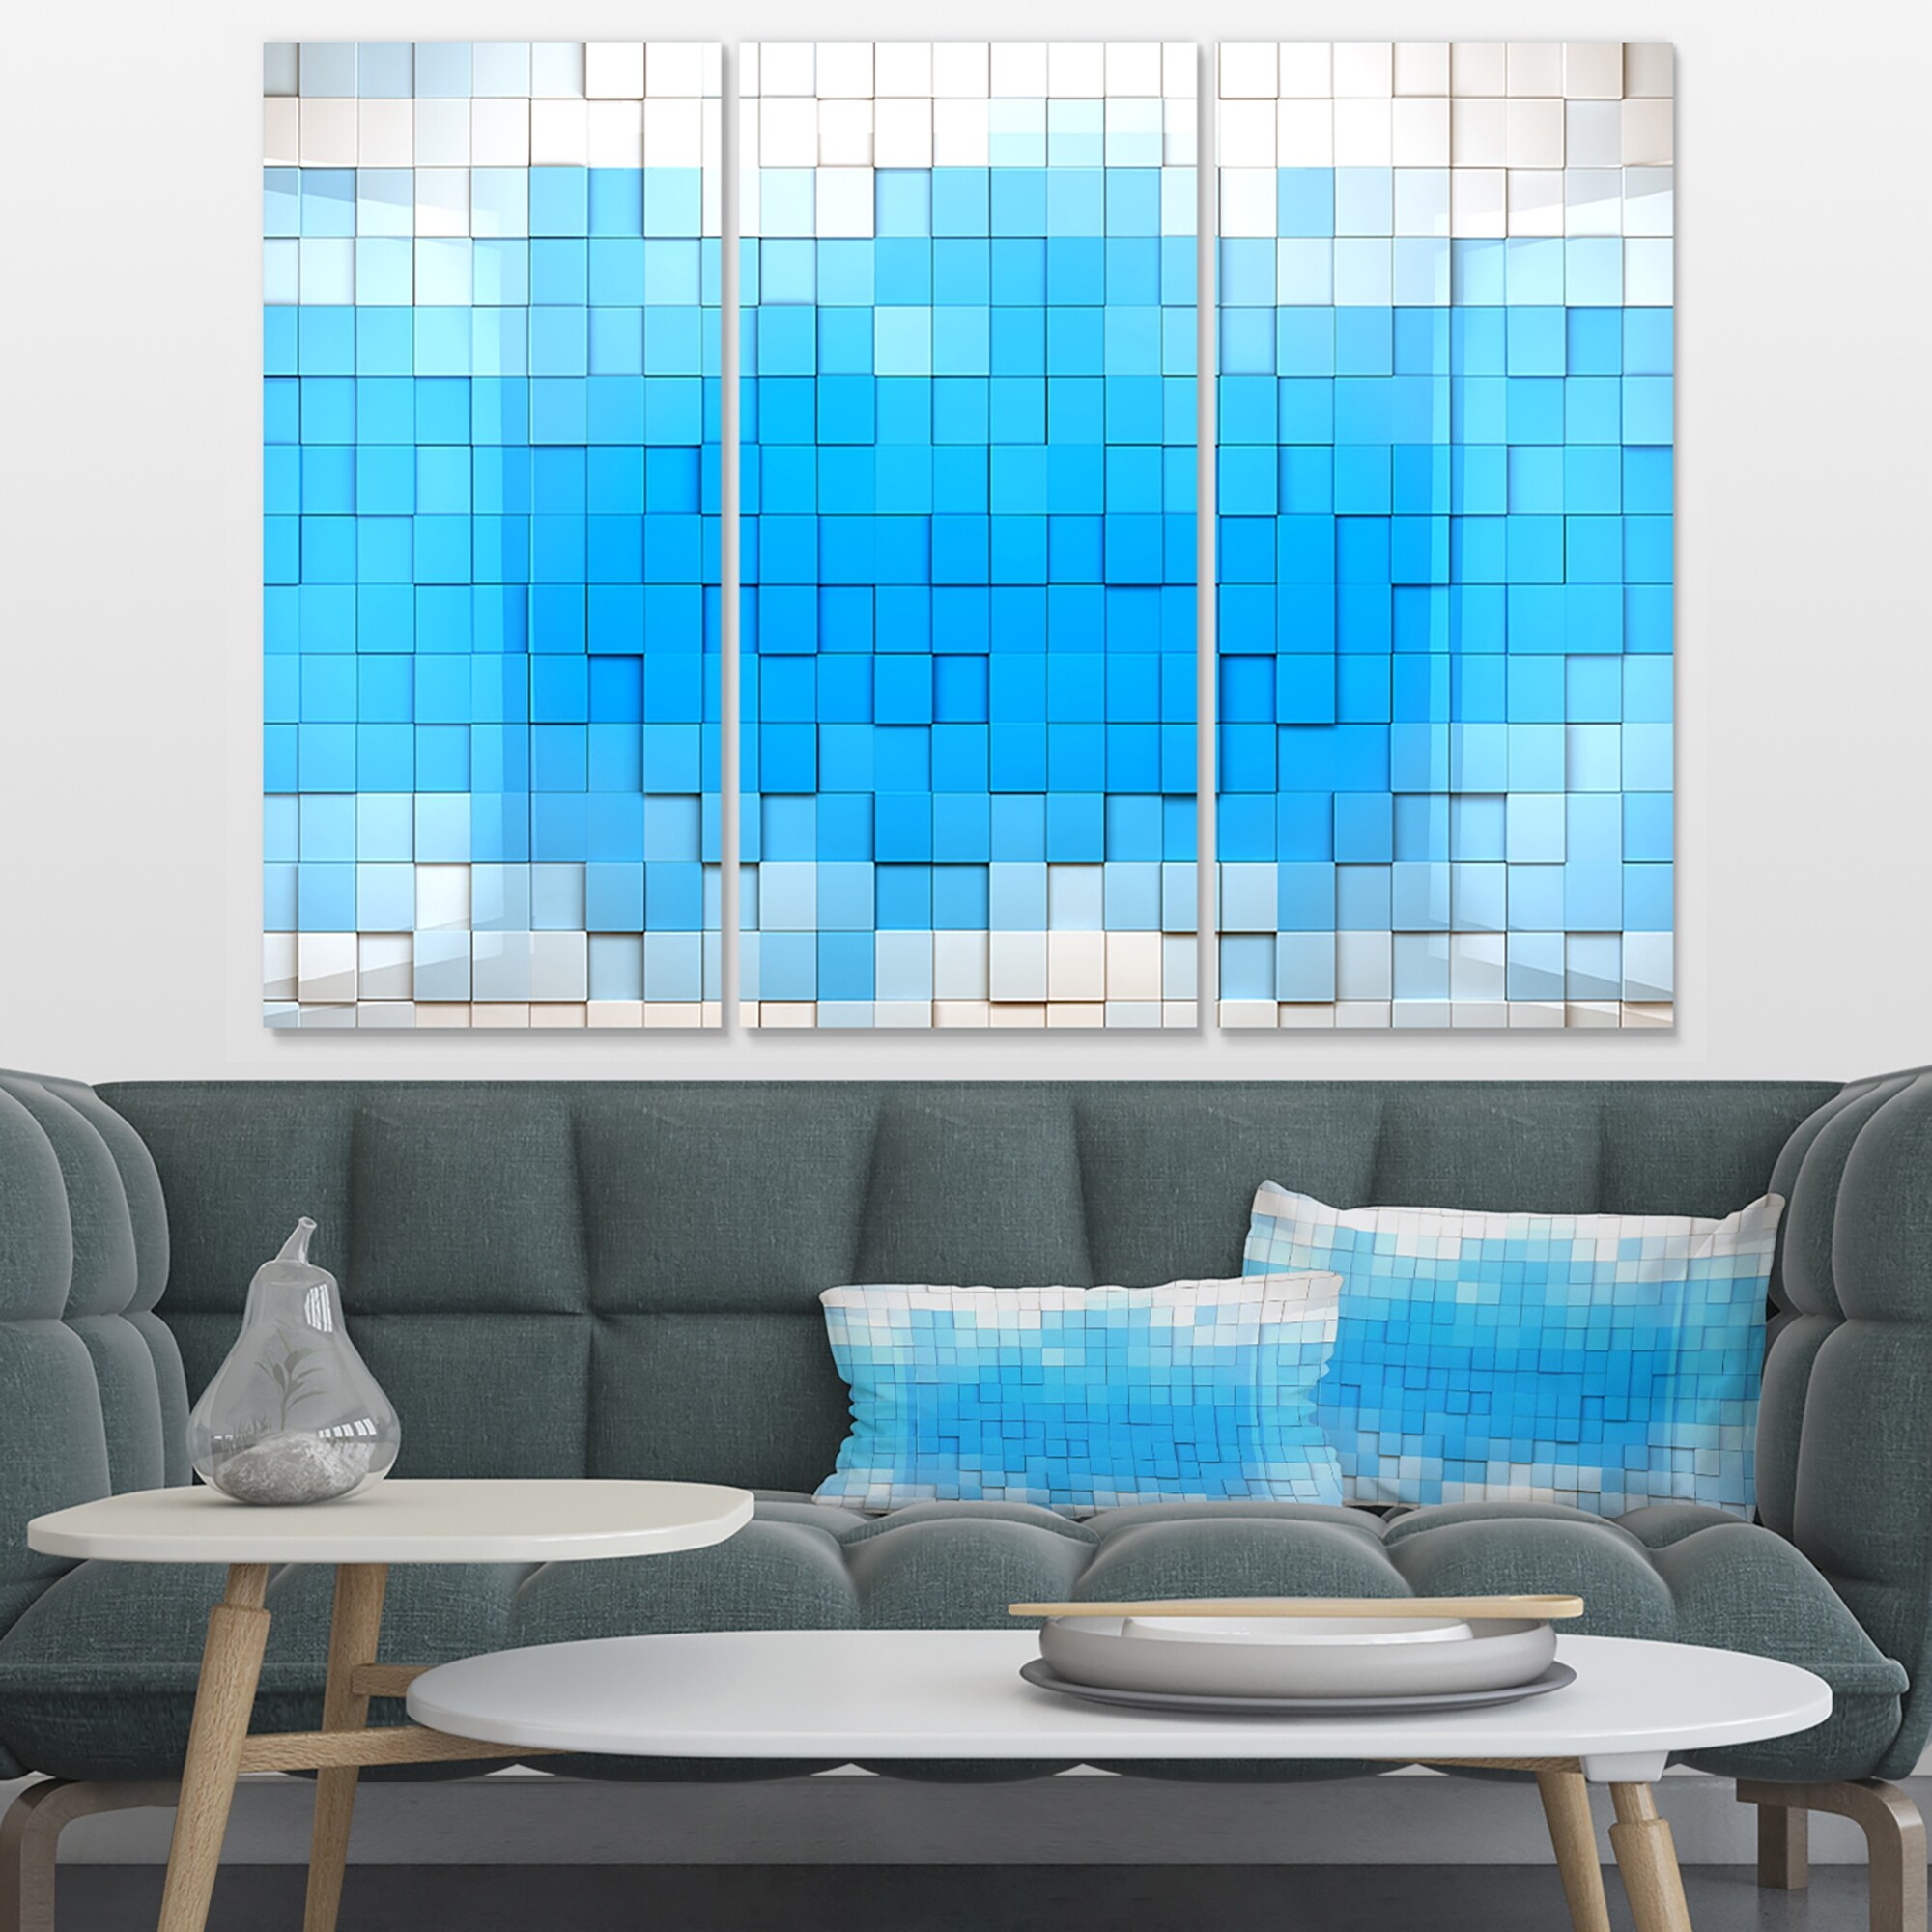 Designart 'Stained Glass Abstract Pattern' Contemporary Art on Wrapped Canvas Set - 36x28 - 3 Panels - 36 in. Wide x 28 in. High